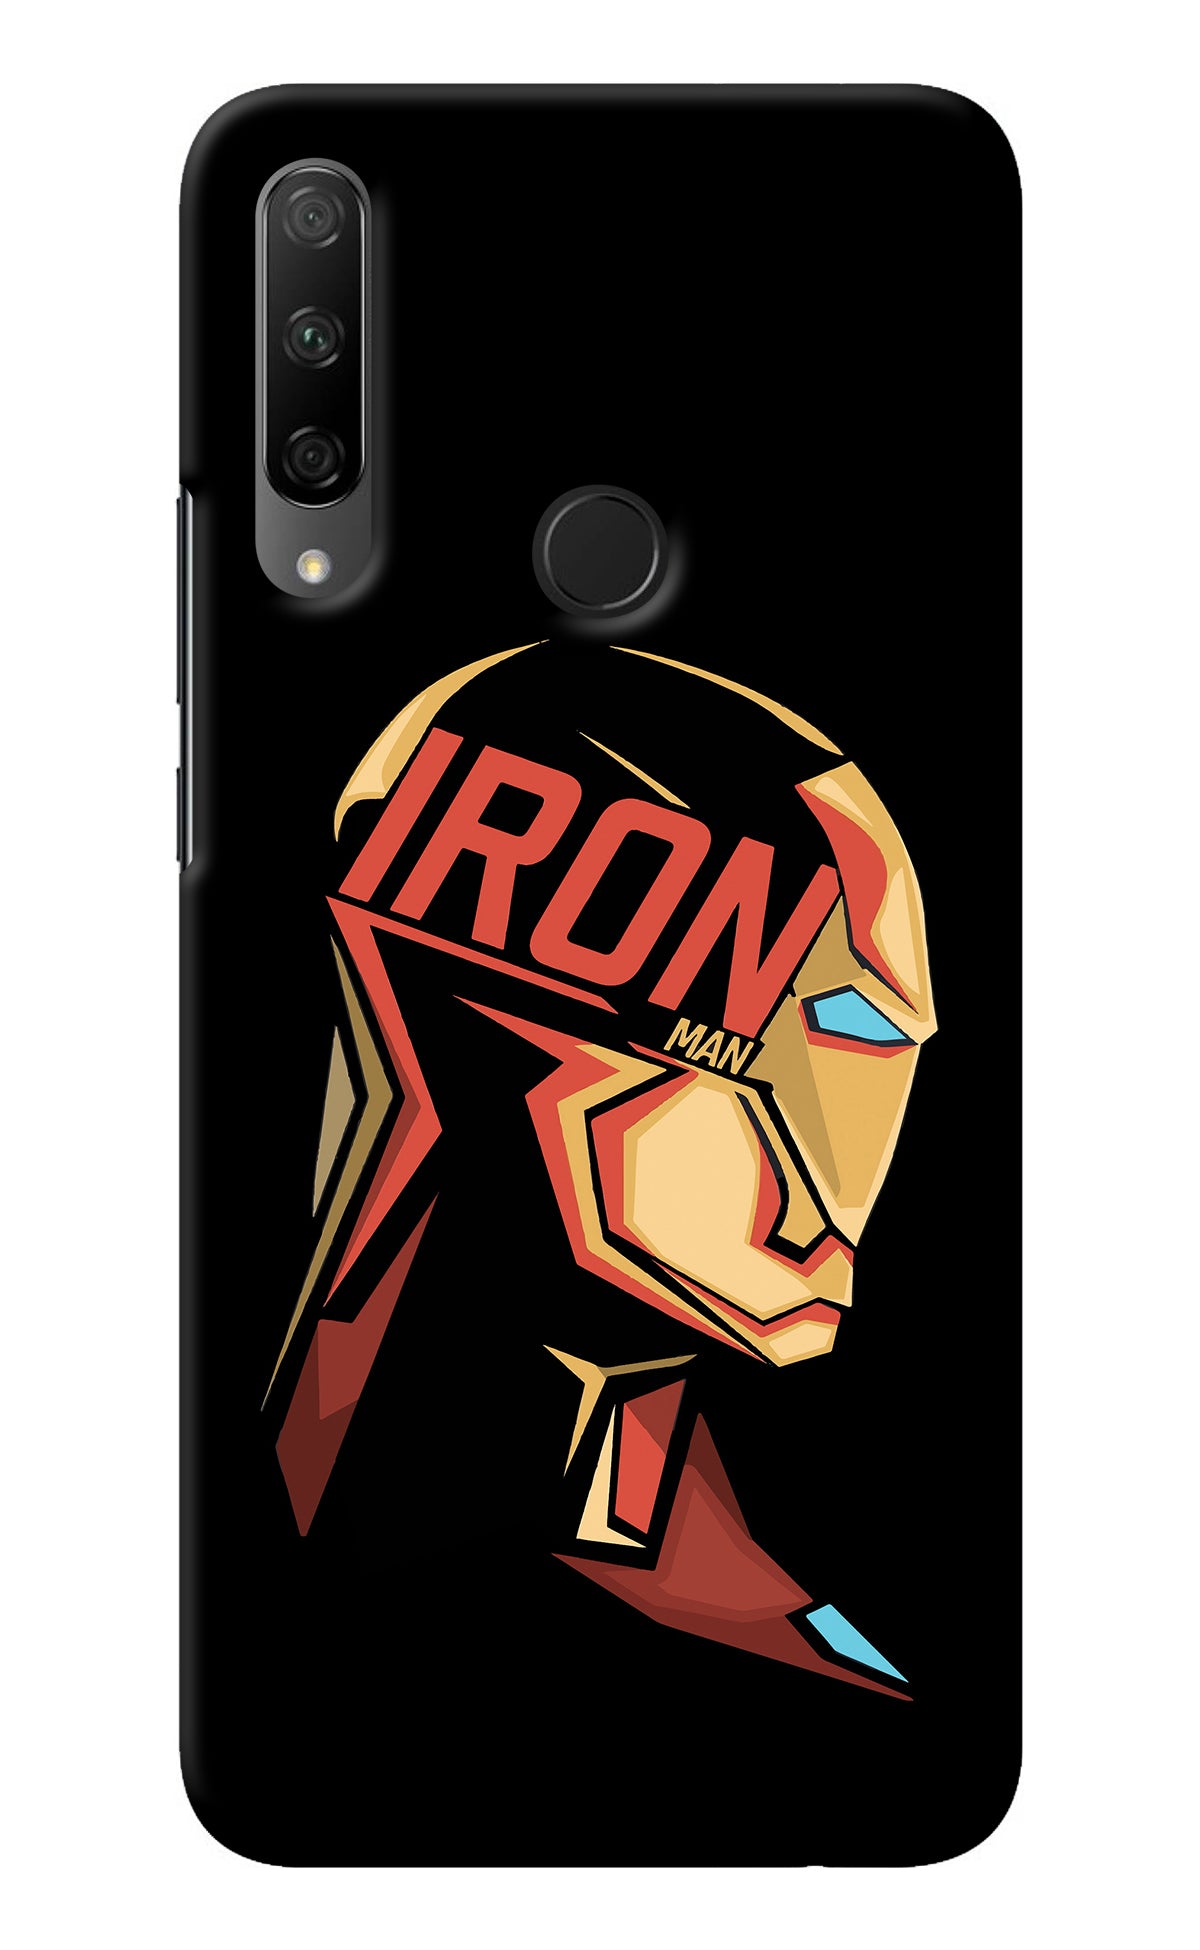 IronMan Honor 9X Back Cover